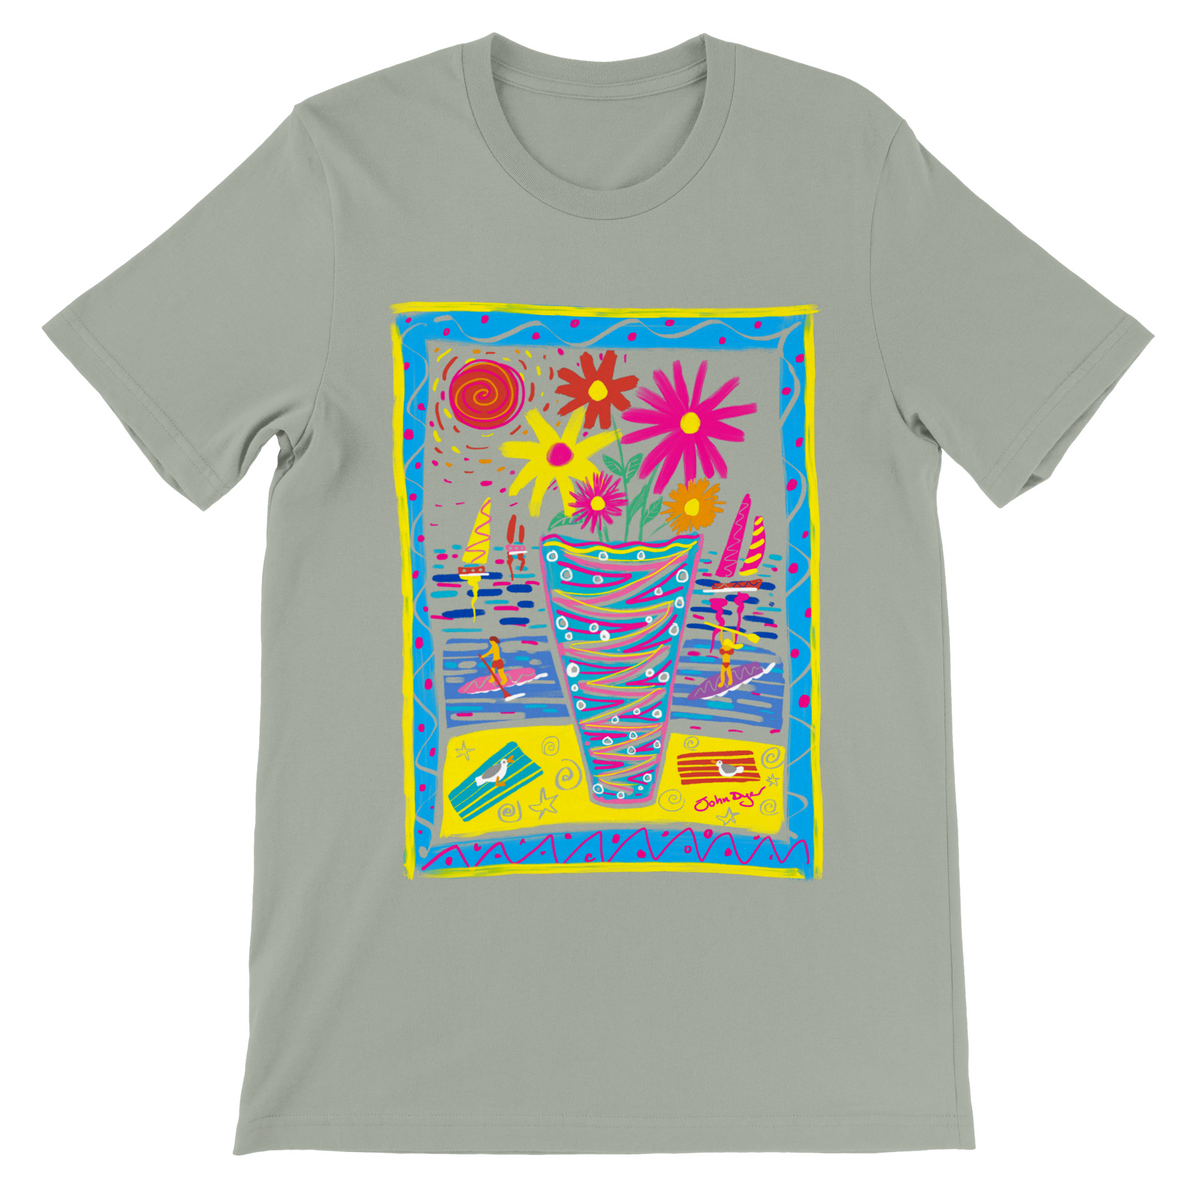 John Dyer Unisex Art T-Shirt. Summer Paddle Boarding Cornwall with Sailing Boats and Flowers